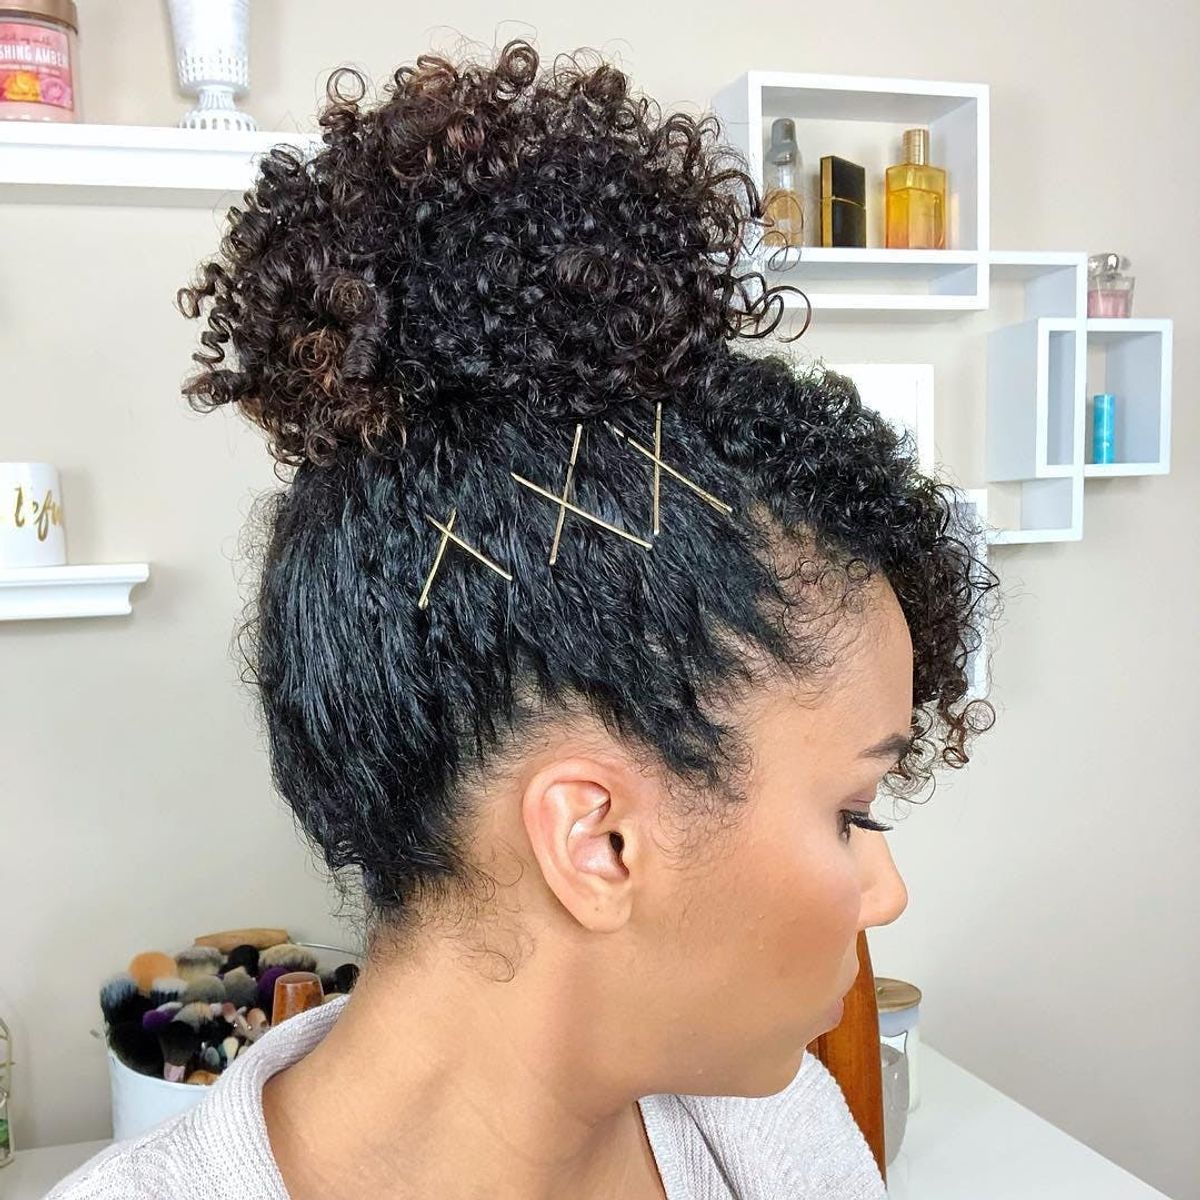 Bobby Pins Are the New Trendy Hair Accessory You Already Own